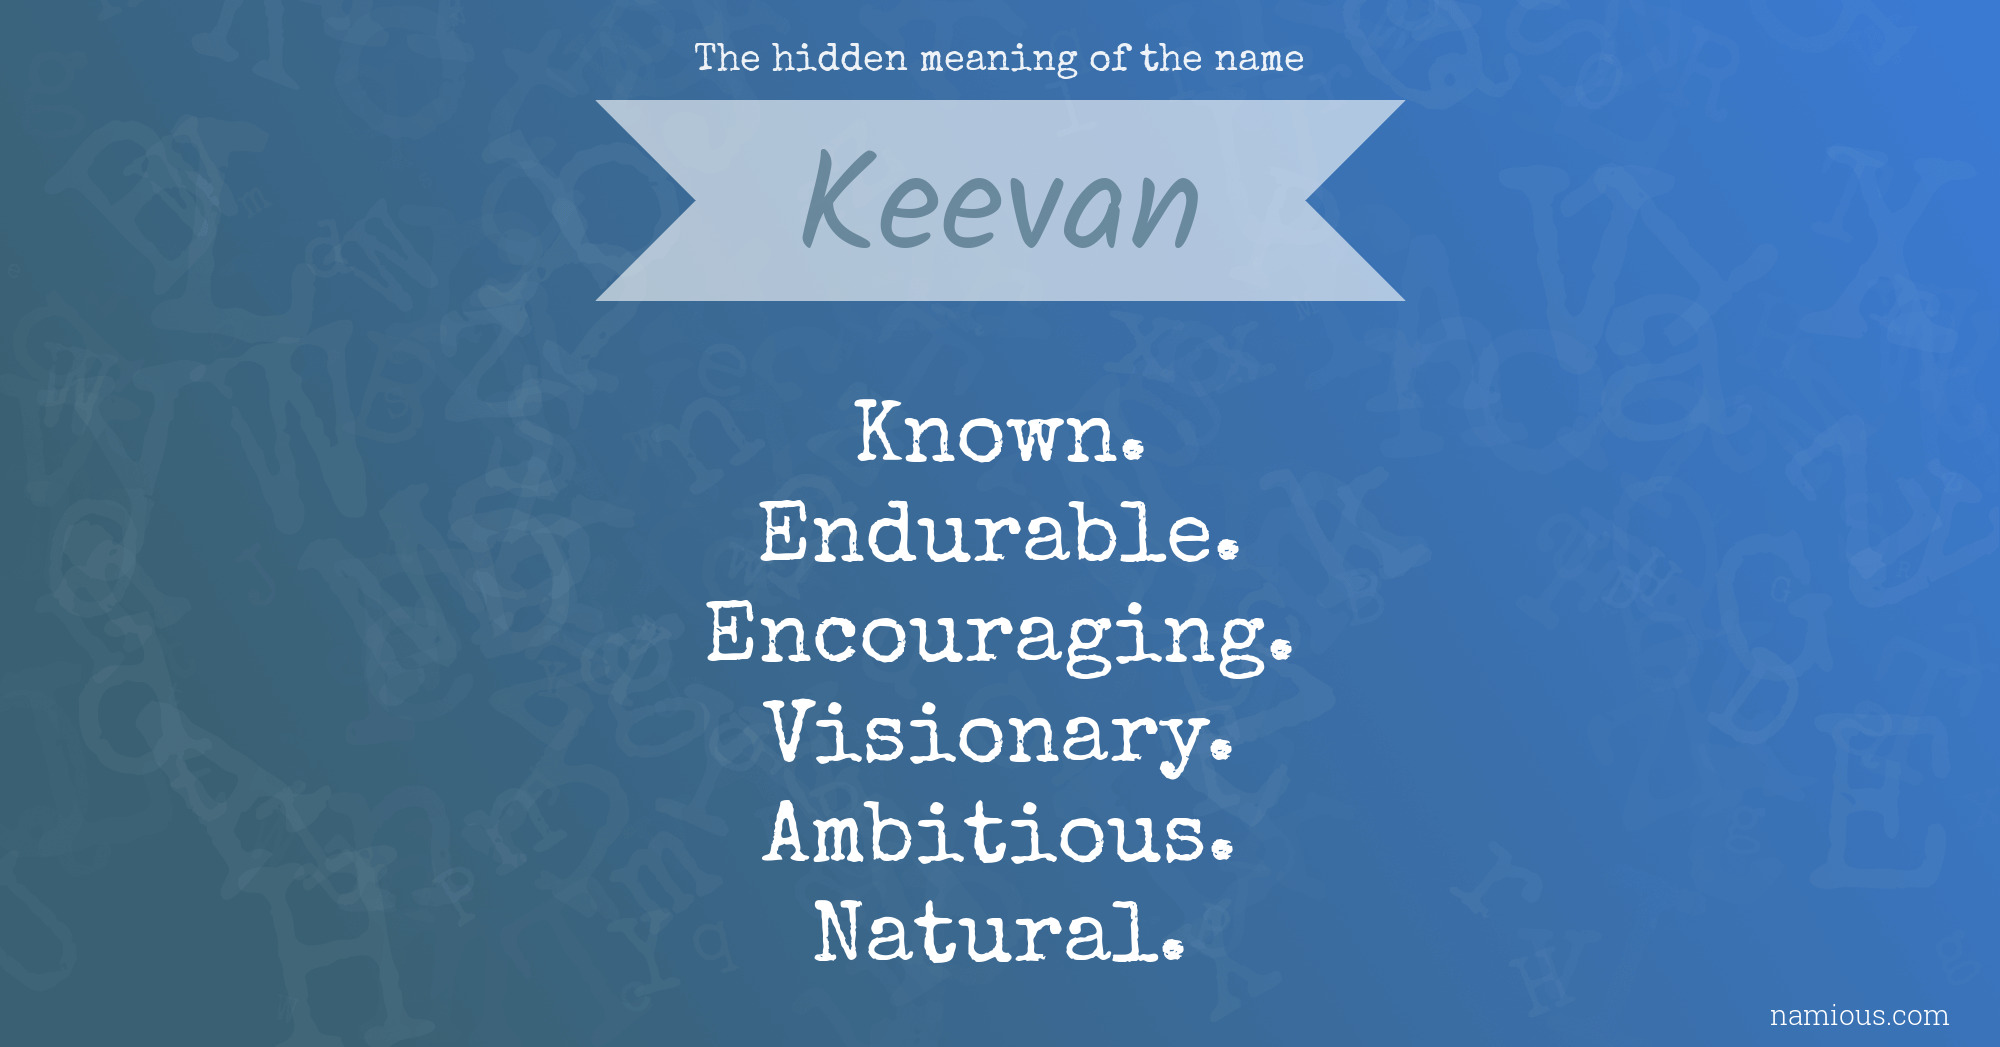 The hidden meaning of the name Keevan